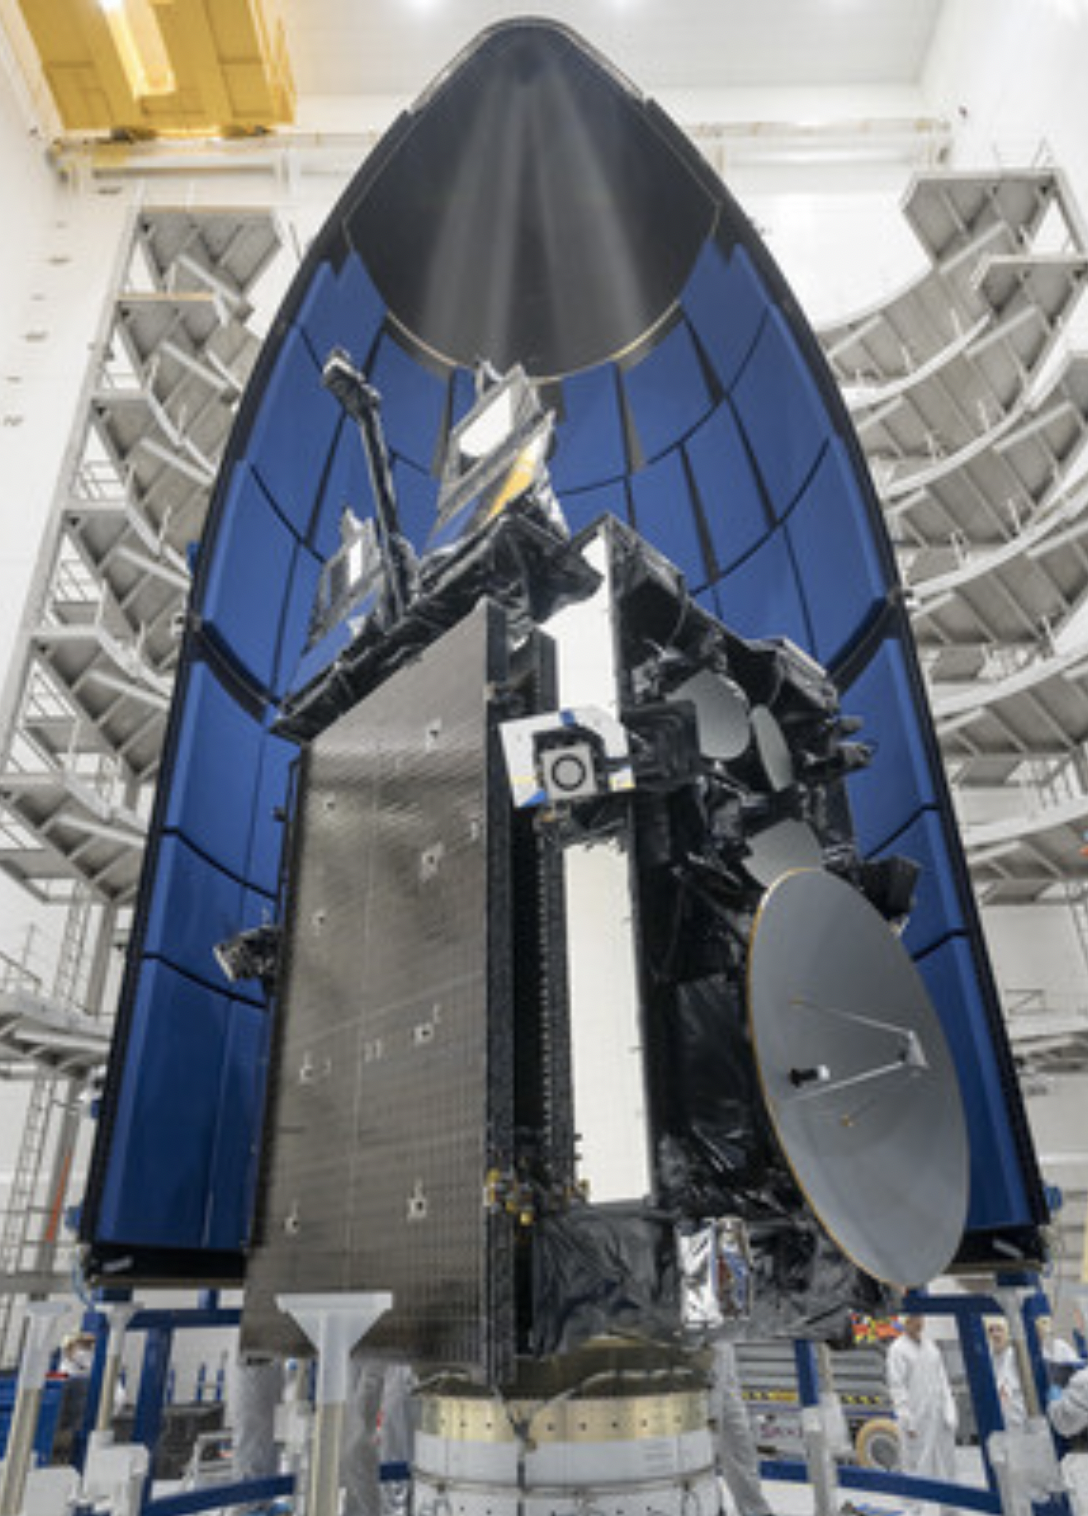 Lockheed Martin-Built Protected Communications Satellite Confirmed Online in Orbit Following Successful Launch